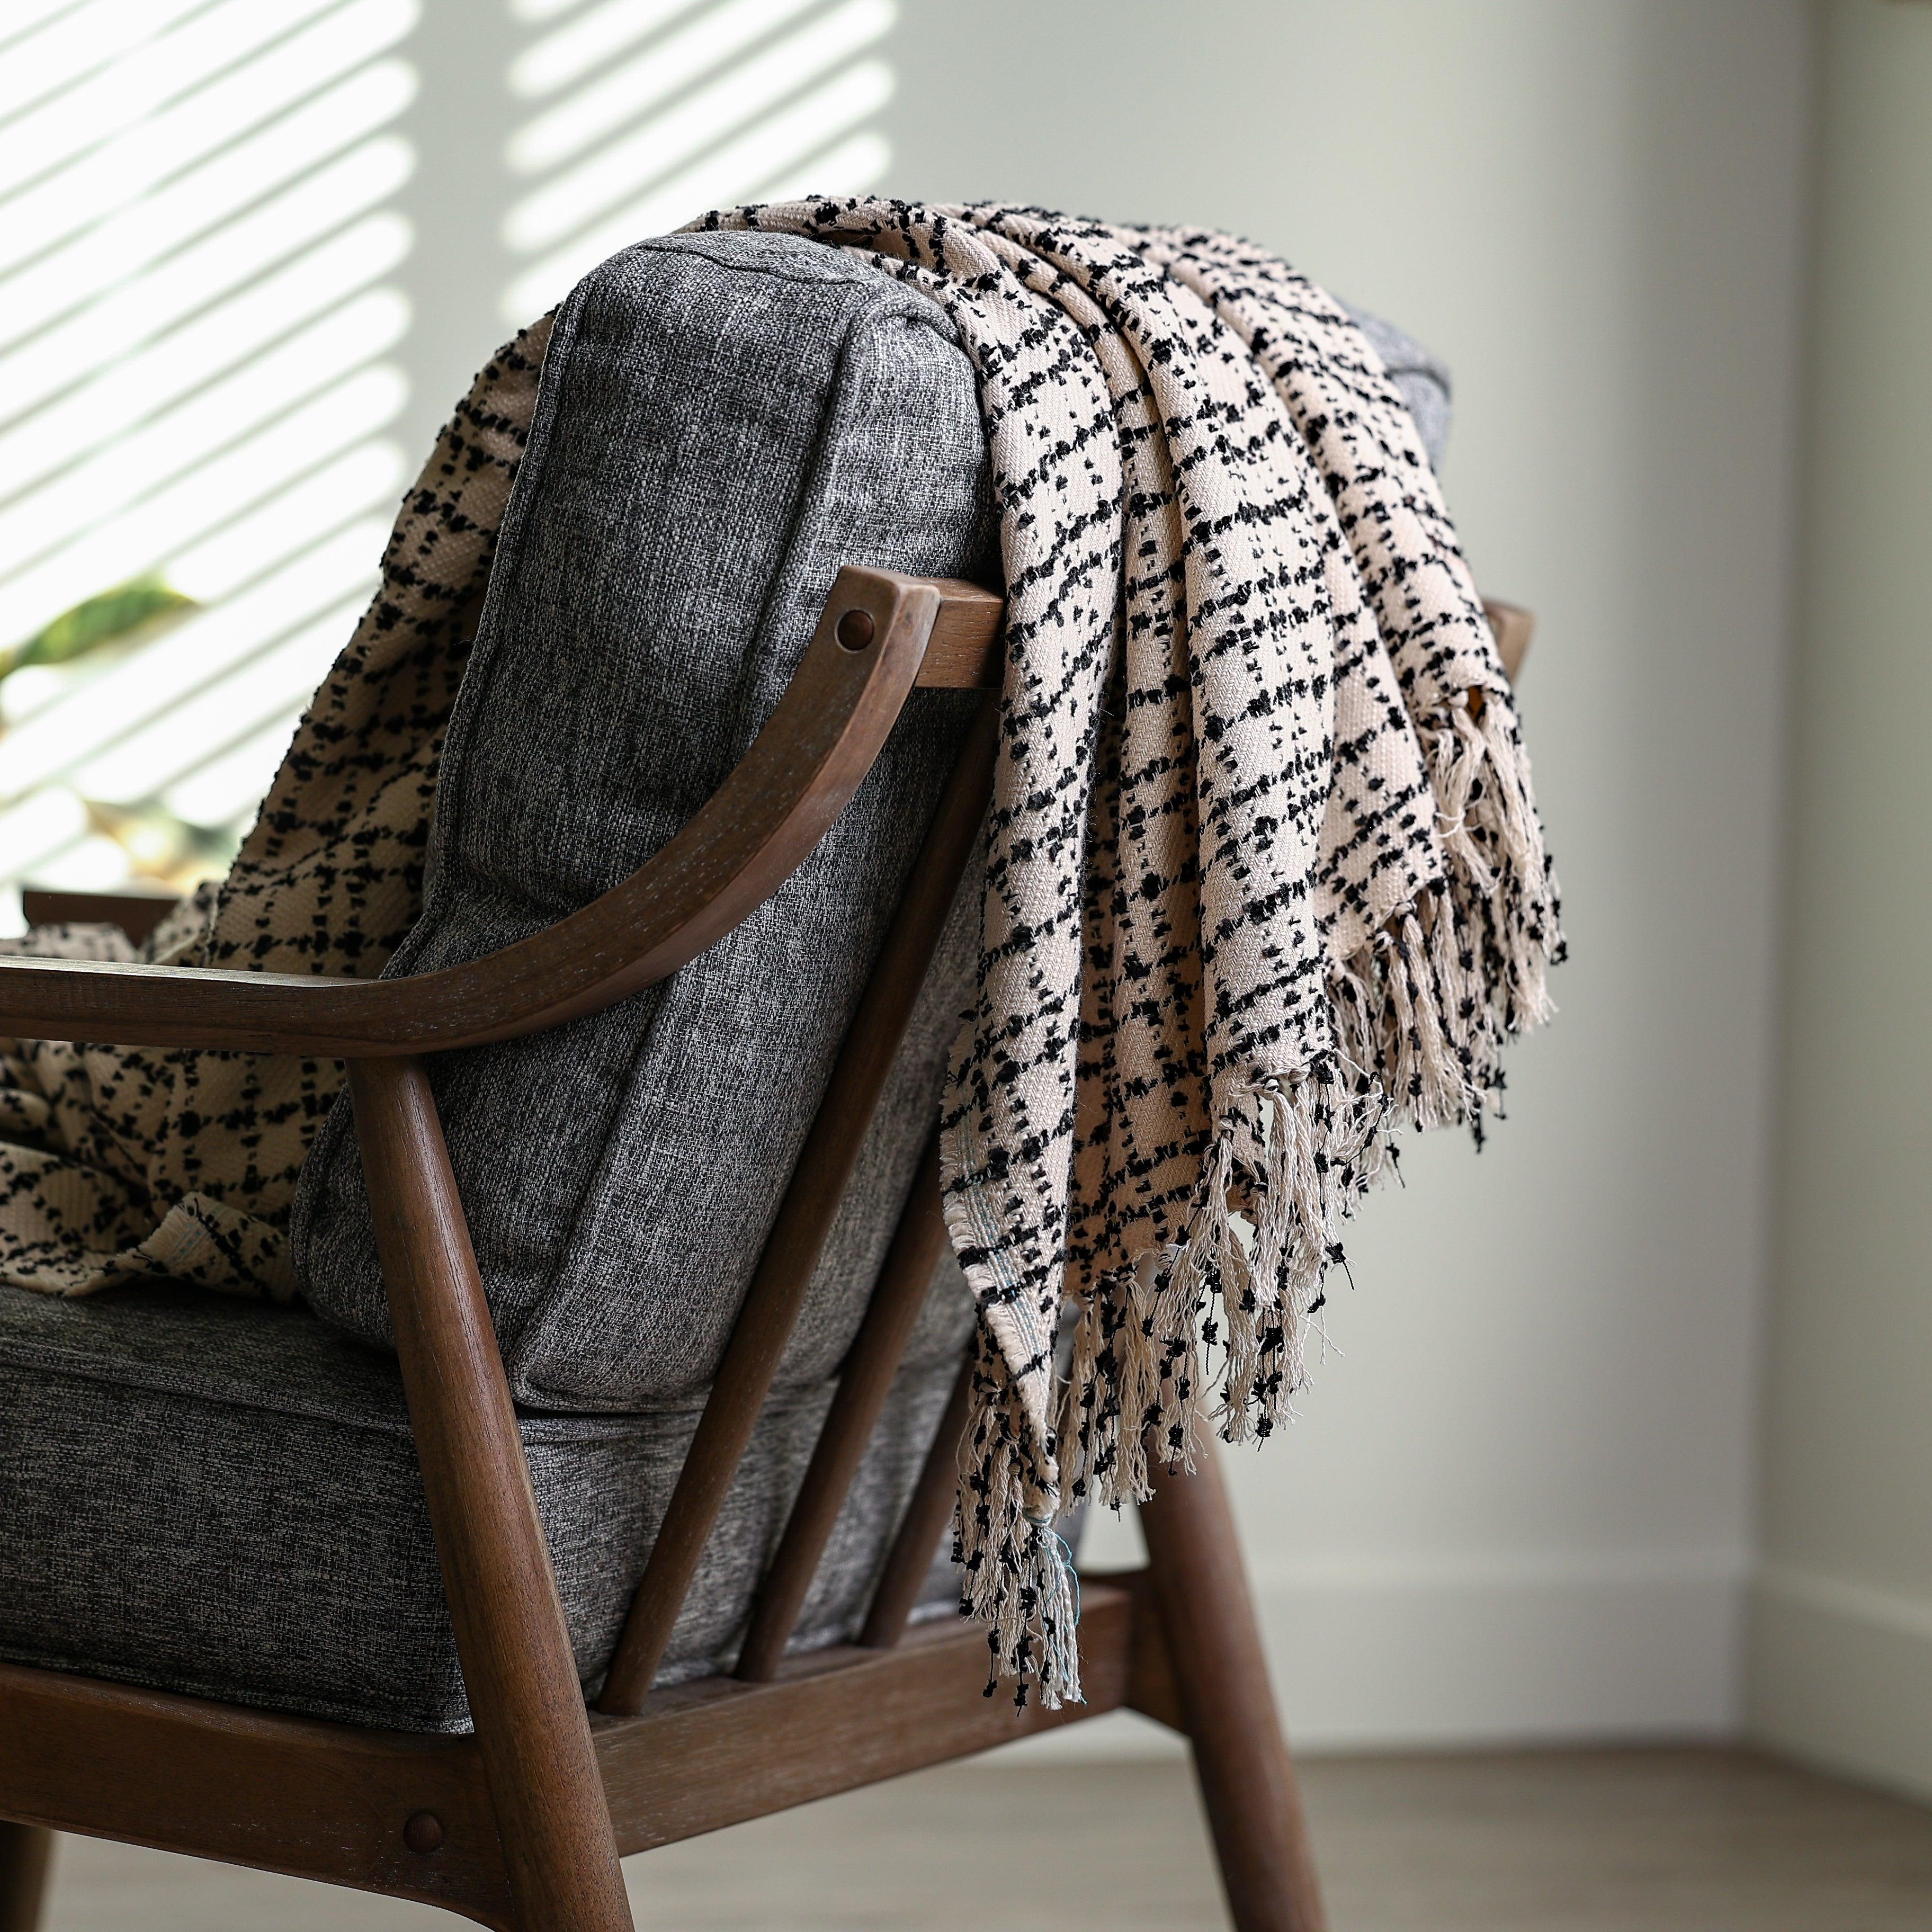 SIMPLE CHECK THROW BLANKET - Boucle Home